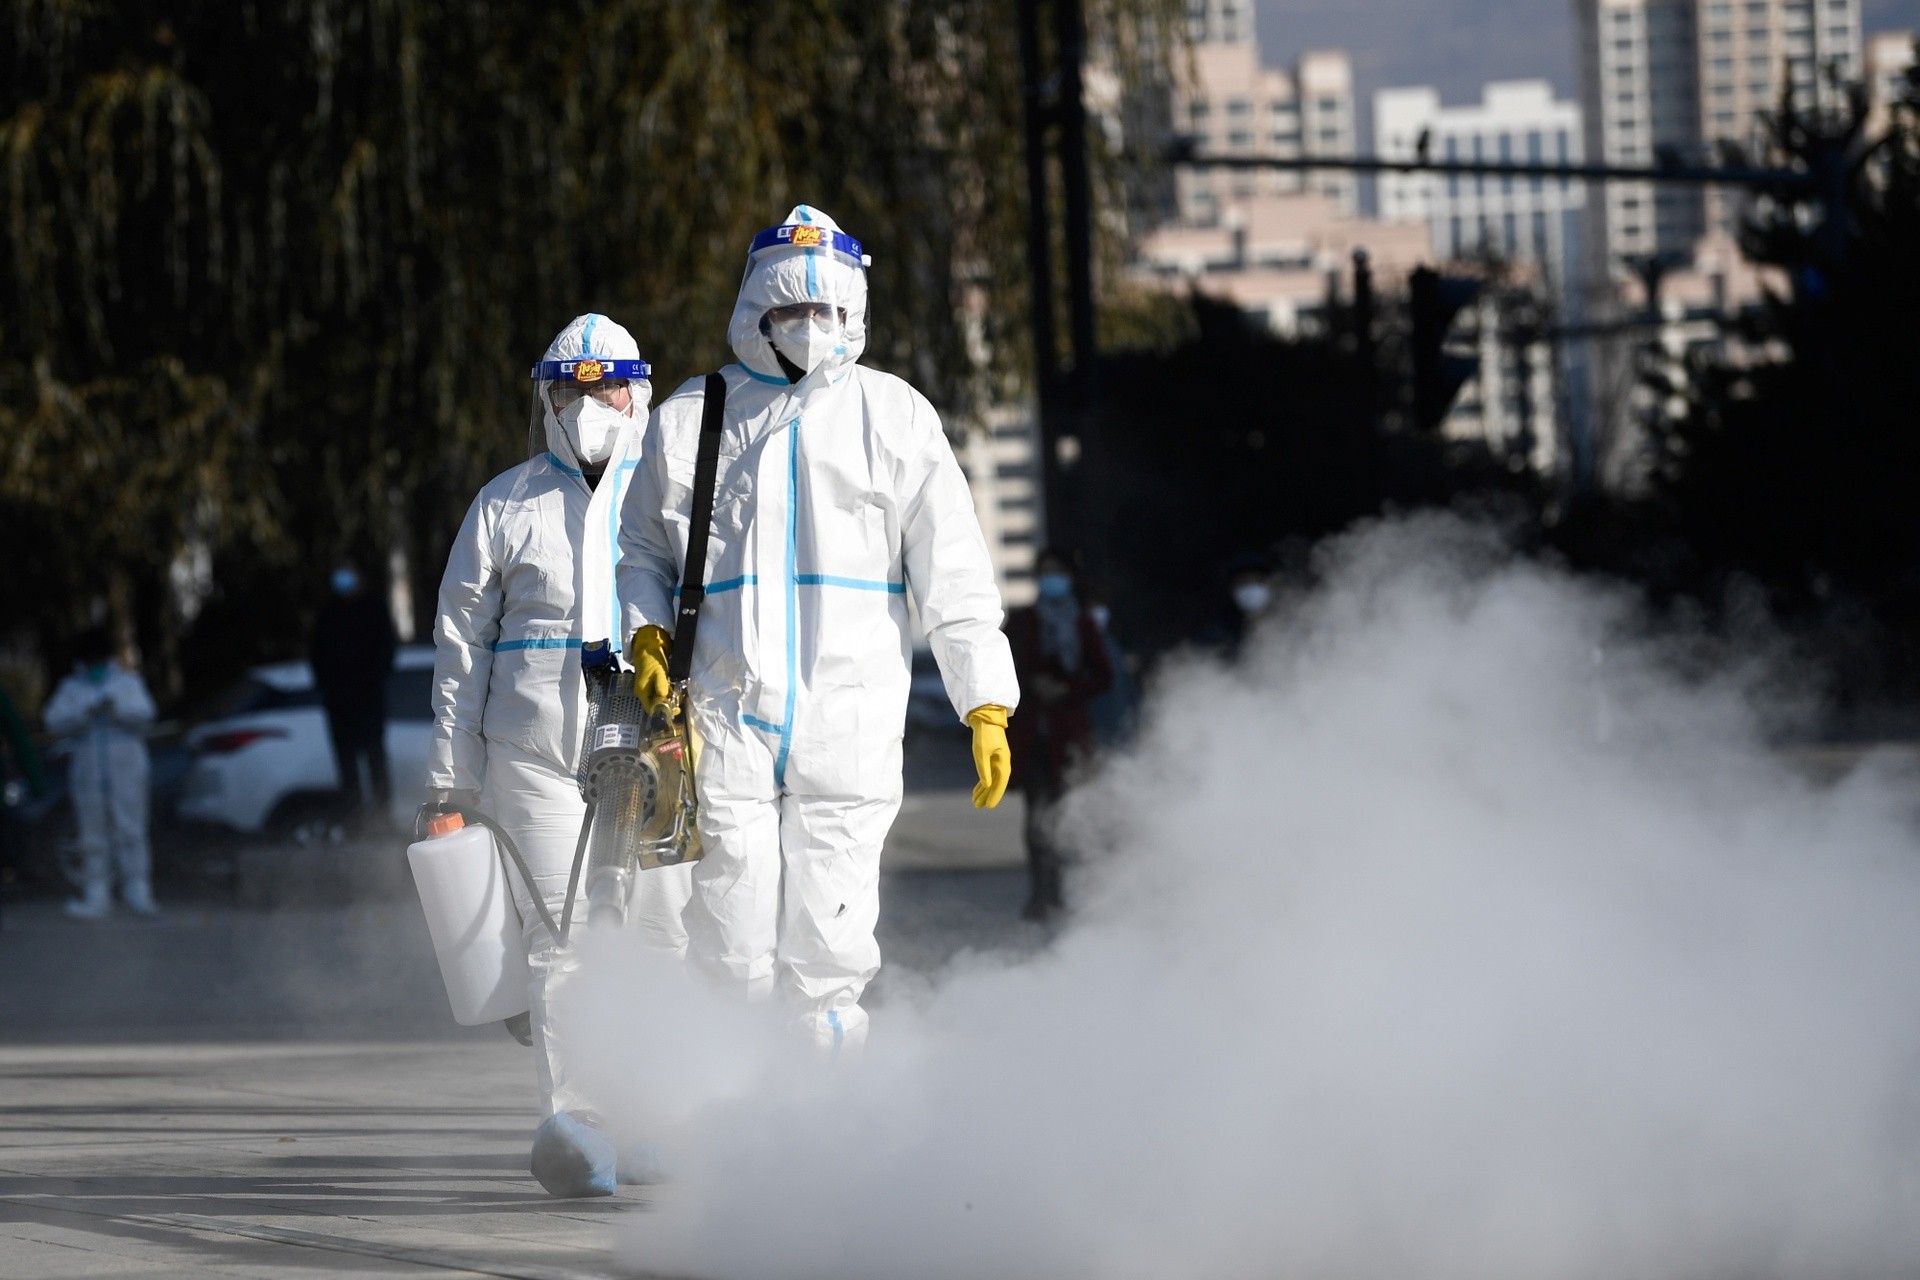 staff-members-spray-disinfectant-at-a-testing-site-in-chengxi-district-of-xining-northwest-china-s-qinghai-province-on-nov-8th-2021-xinhua-1636449504.jpg